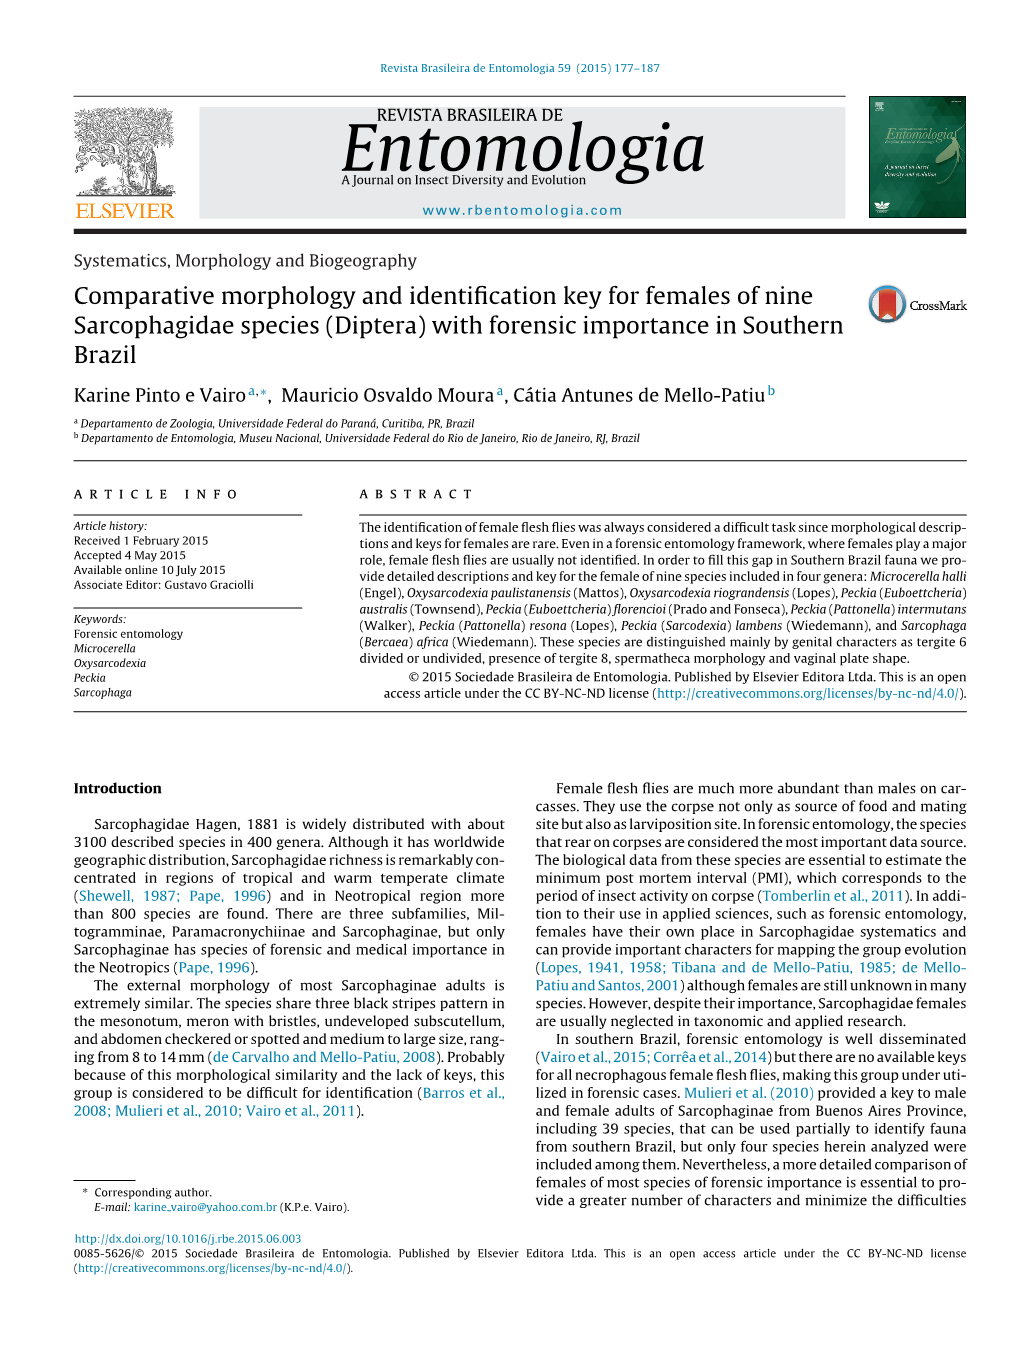 (Diptera) with Forensic Importance in Southern Brazil